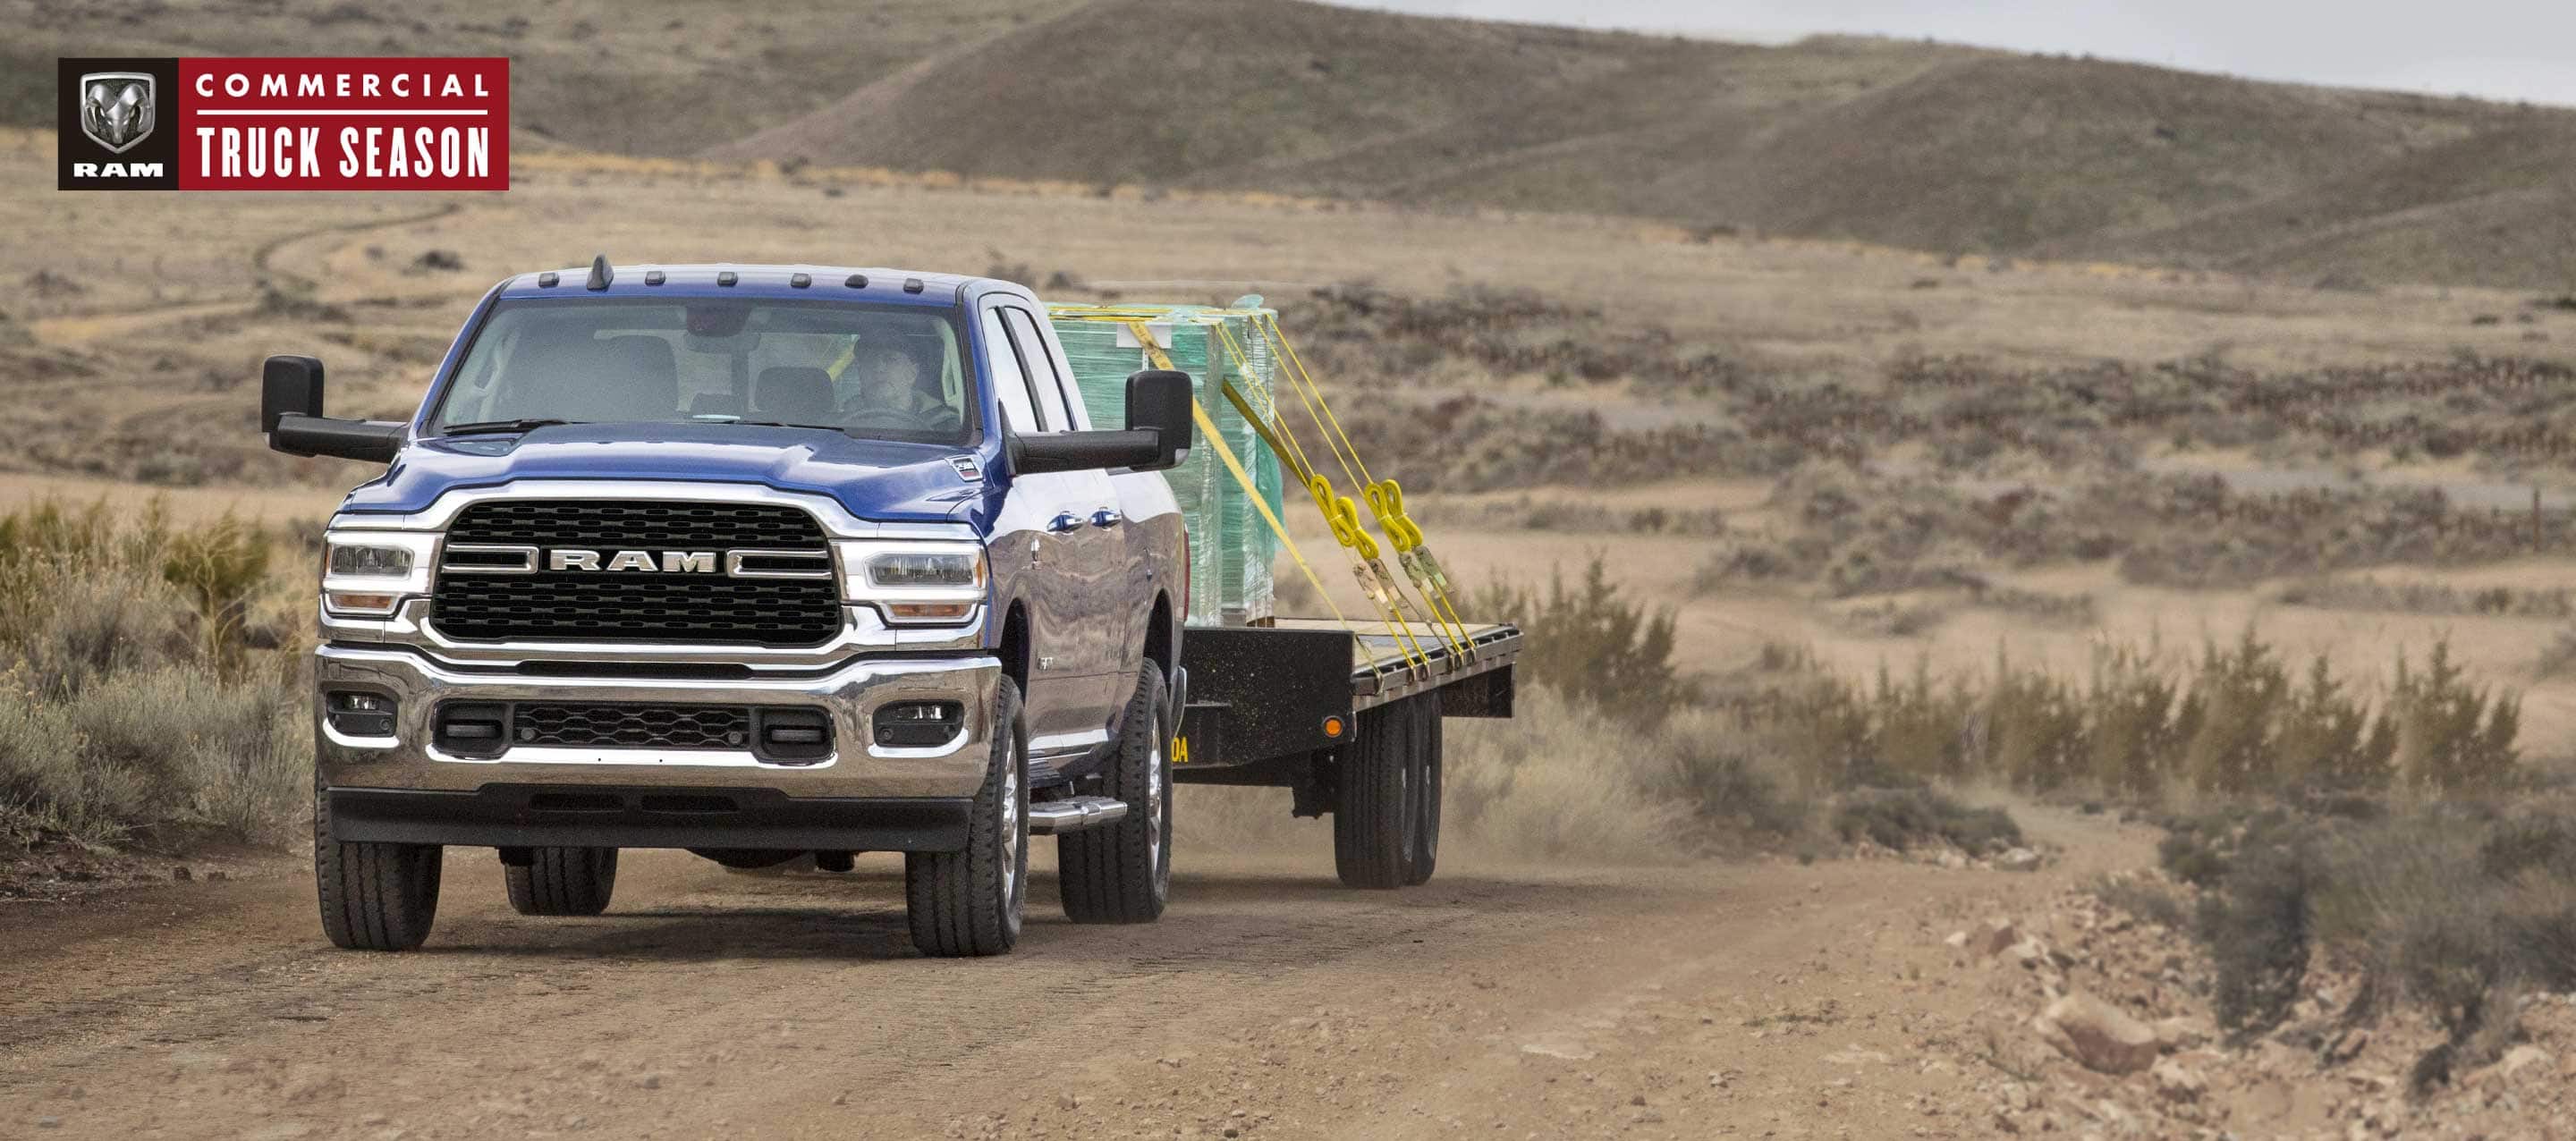 A white 2022 Ram 2500 Tradesman 4x4 Crew Cab towing a wheel loader with scoop. Ram Commercial.